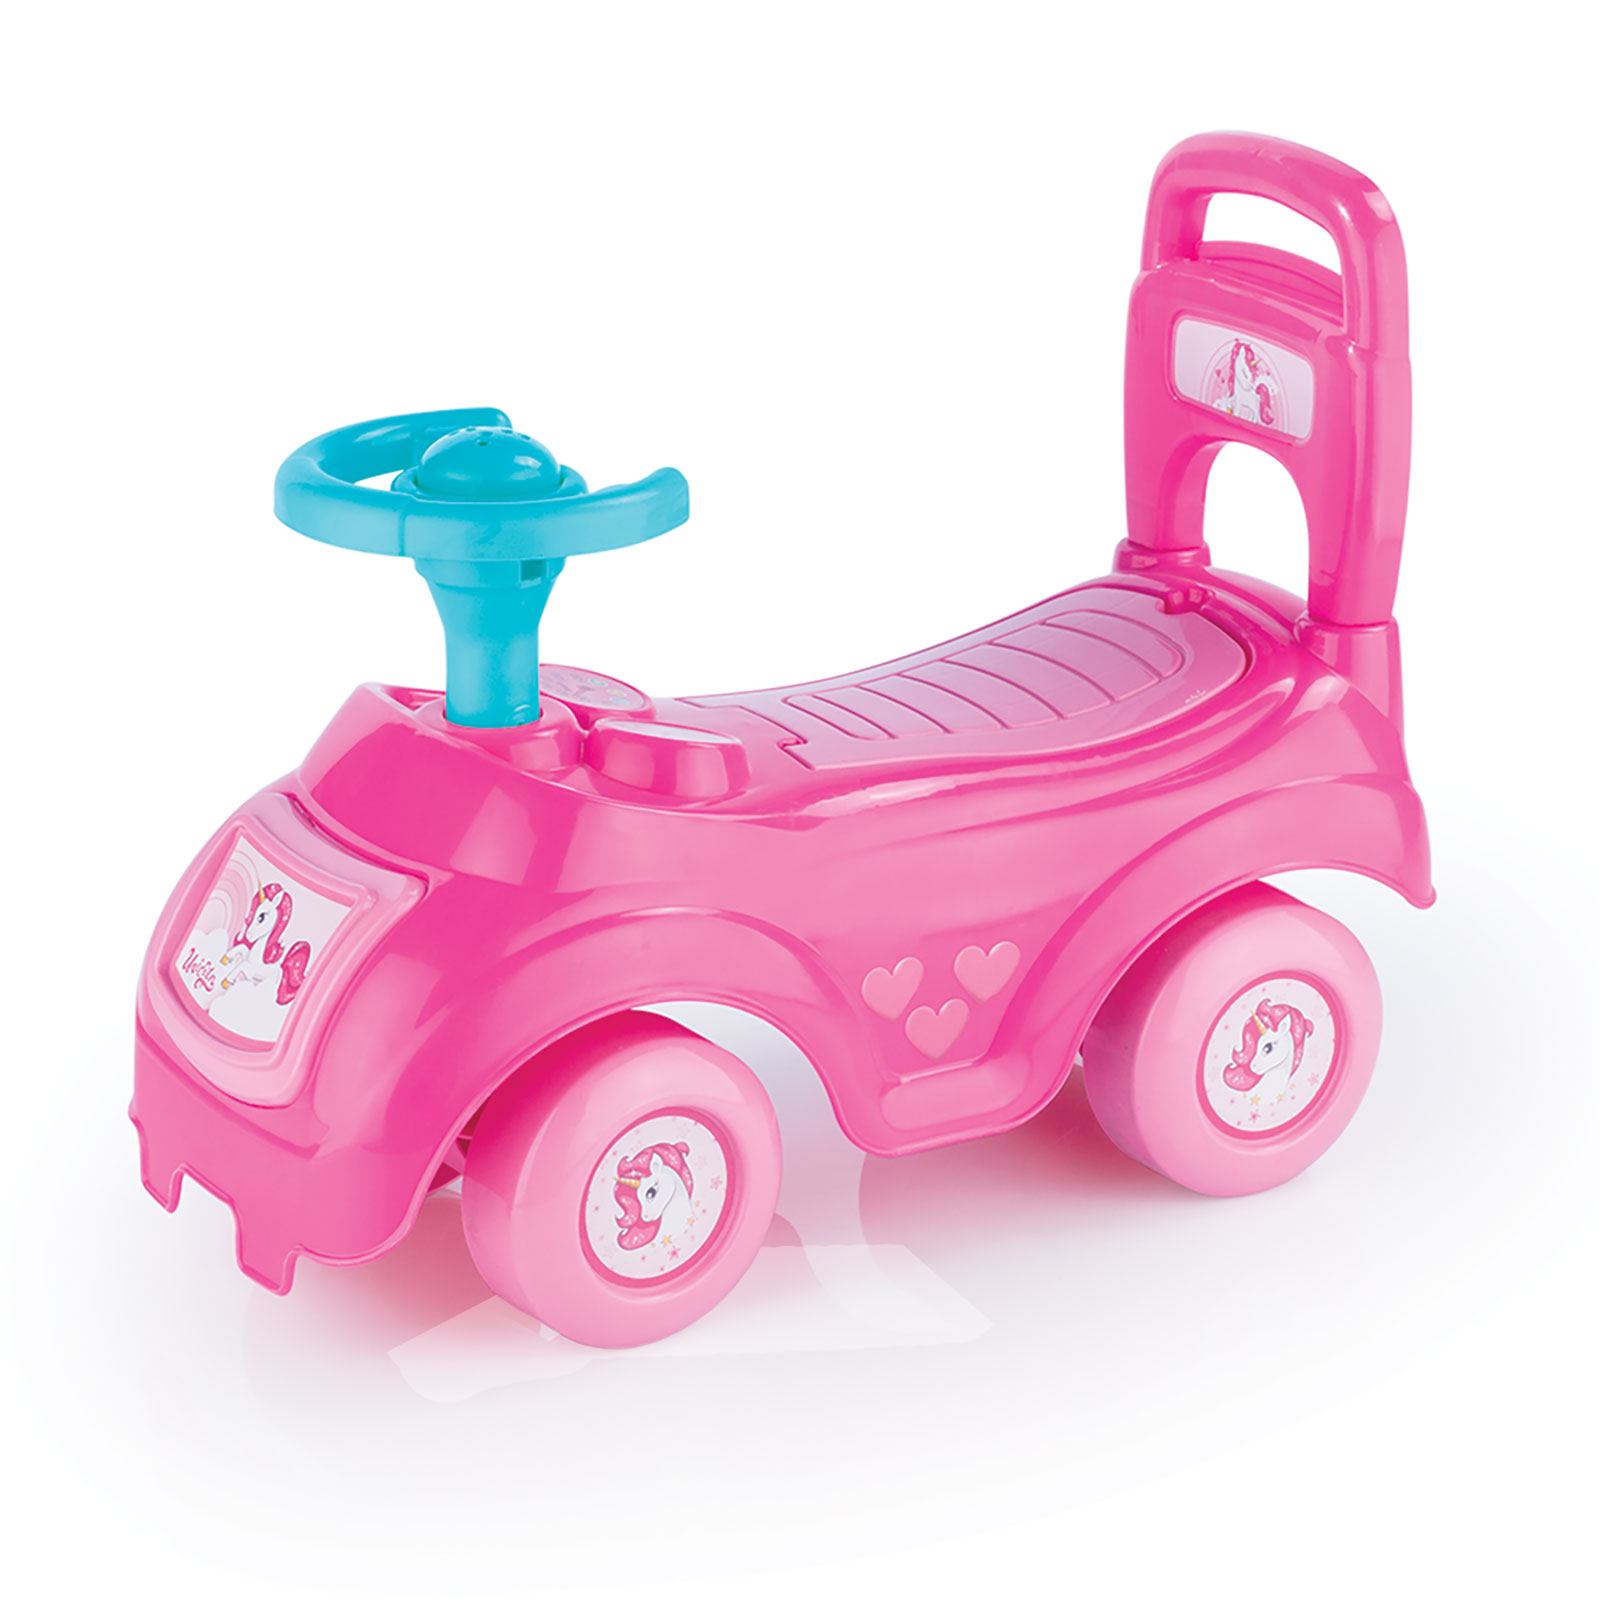 Unicorn Kids 2 in 1 Sit and Ride Push Along Car - Pink (1-5 Years)